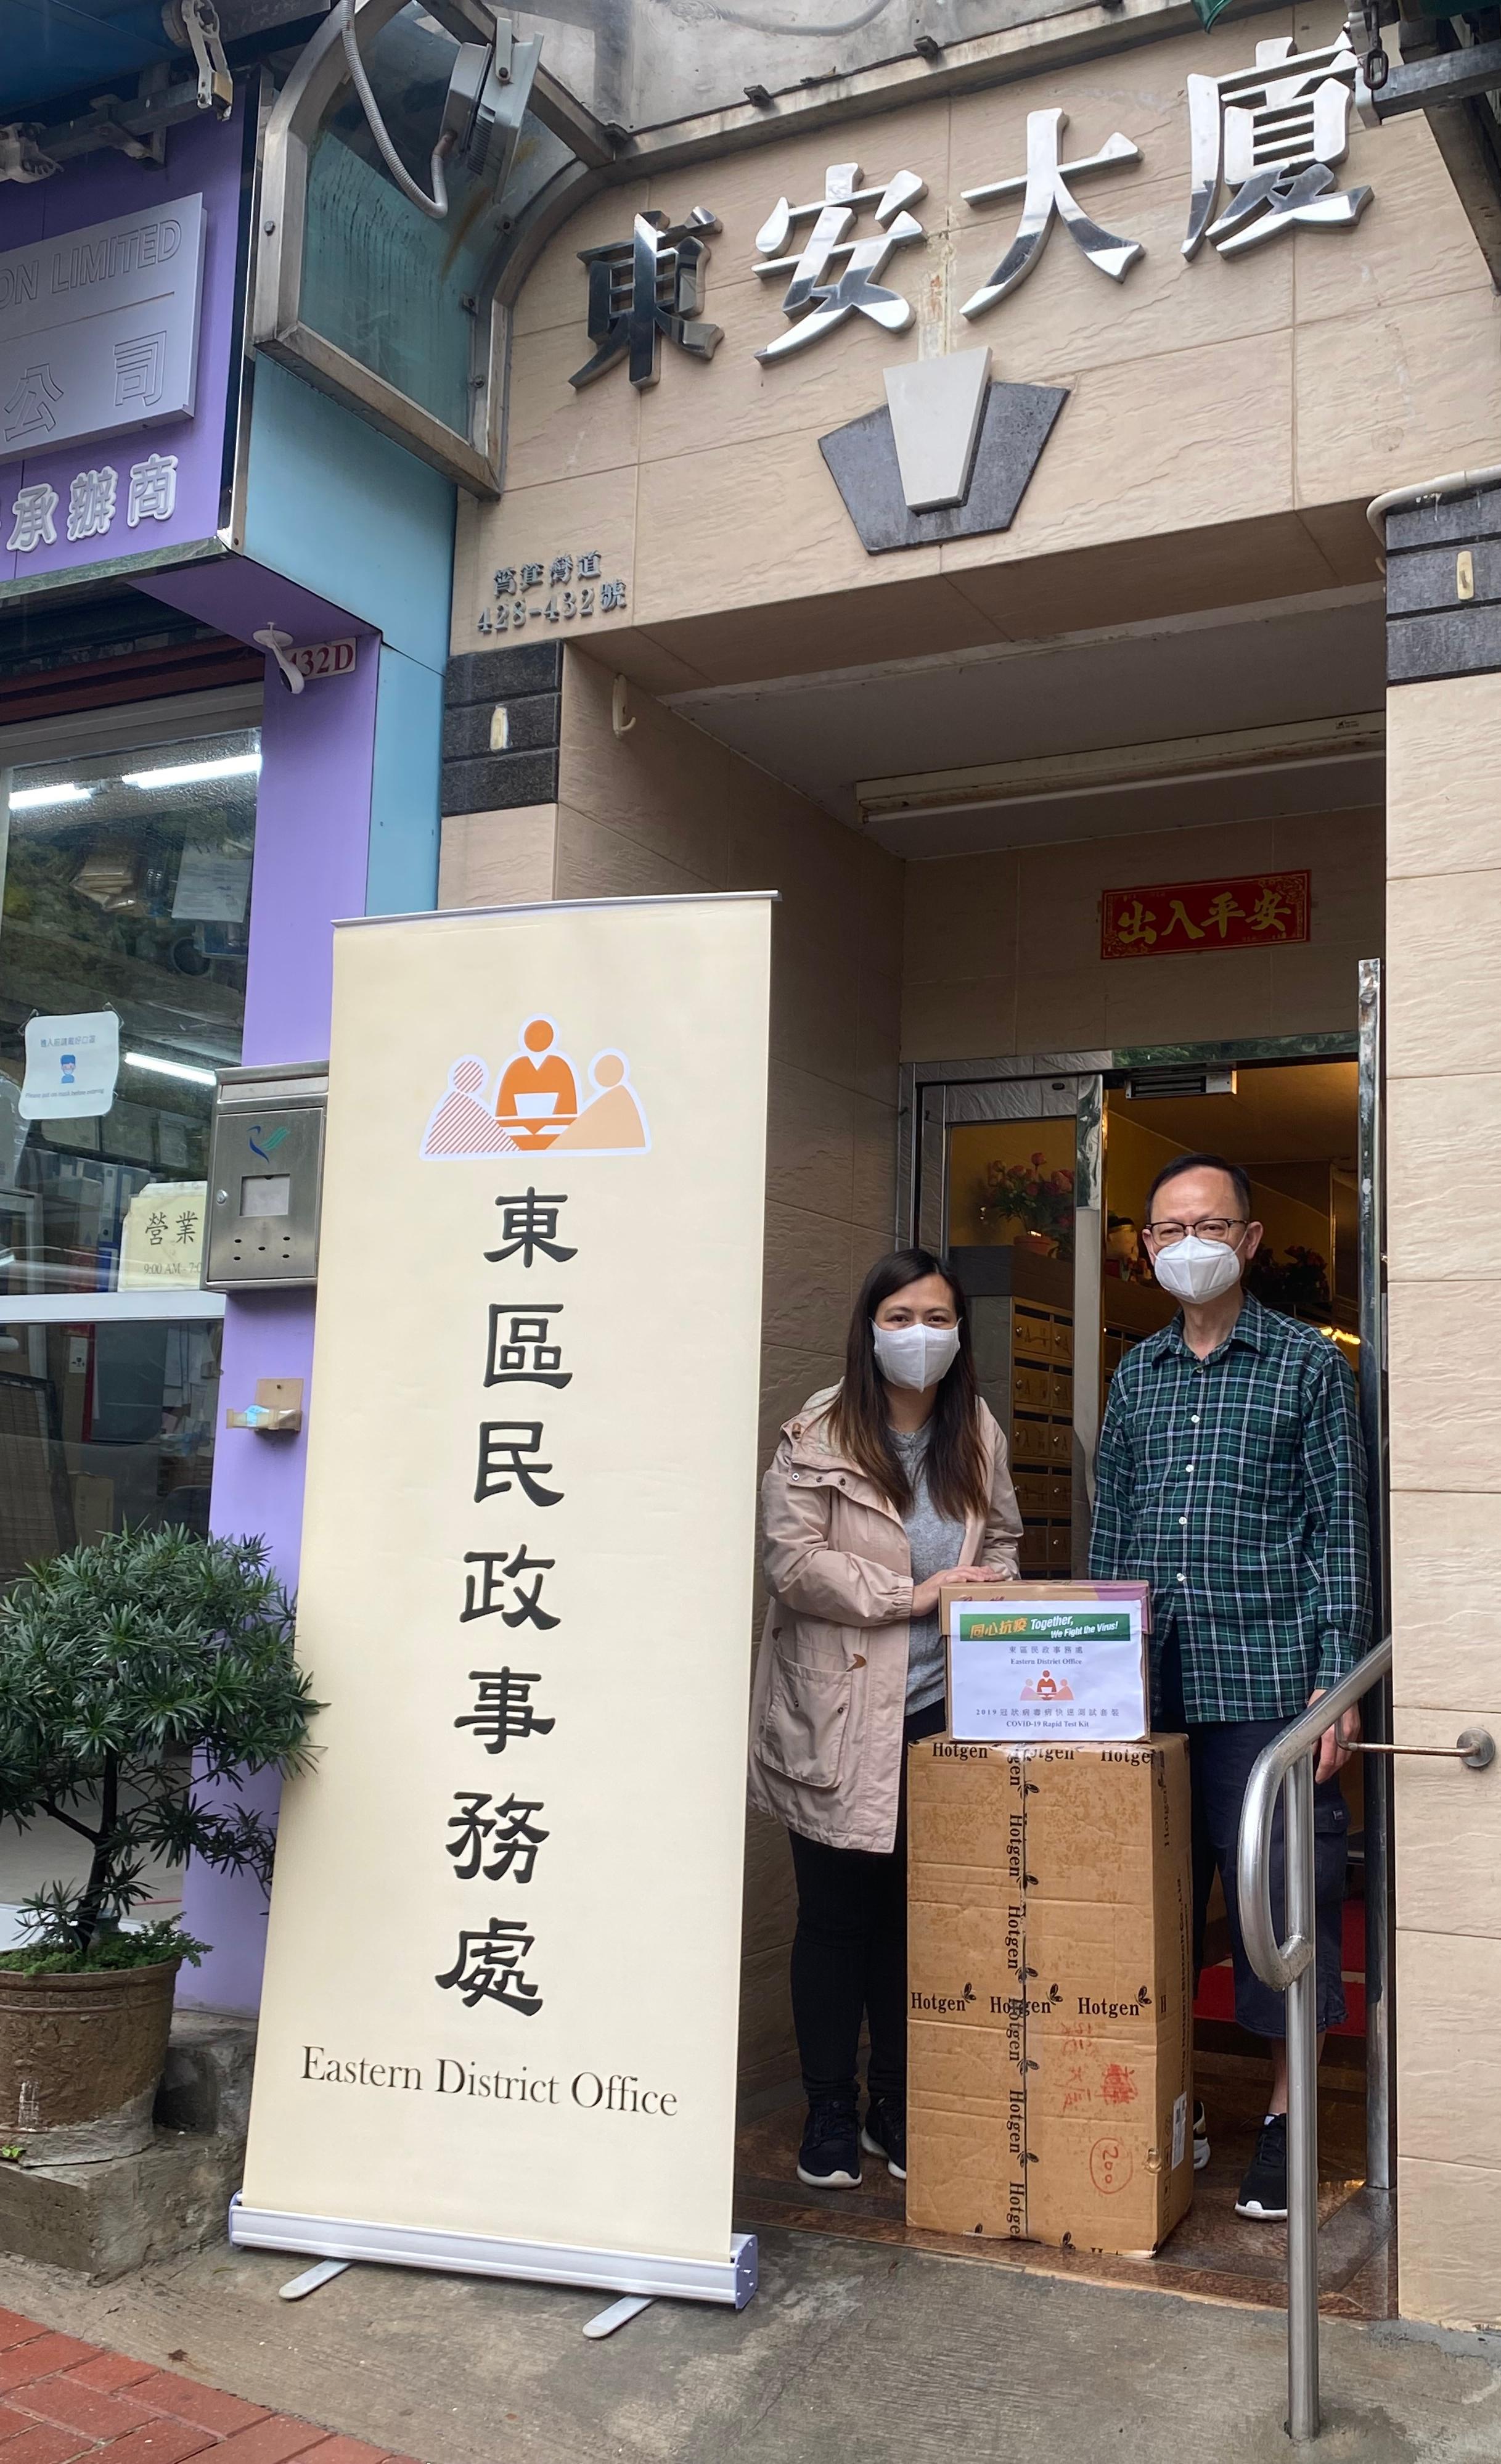 The Eastern District Office today (March 28) distributed COVID-19 rapid test kits to households, cleansing workers and property management staff living and working in Tung On Building for voluntary testing through the property management company.